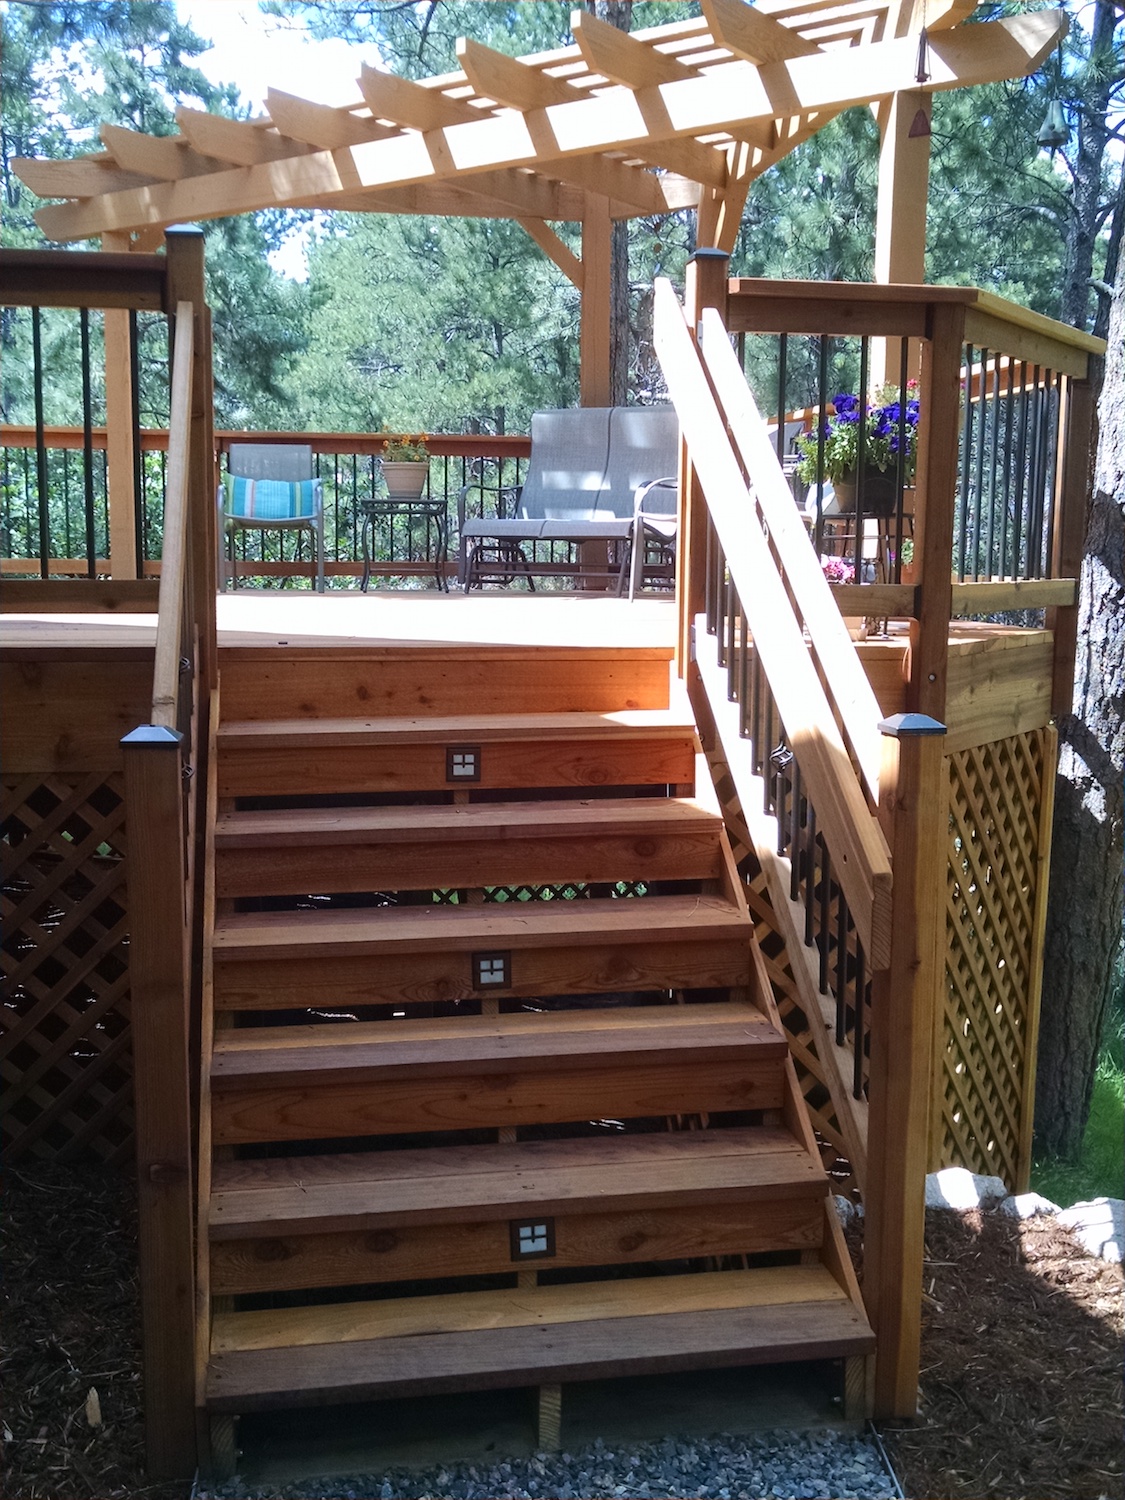 3/4 closed deck stairs with step lights on every other stair riser.